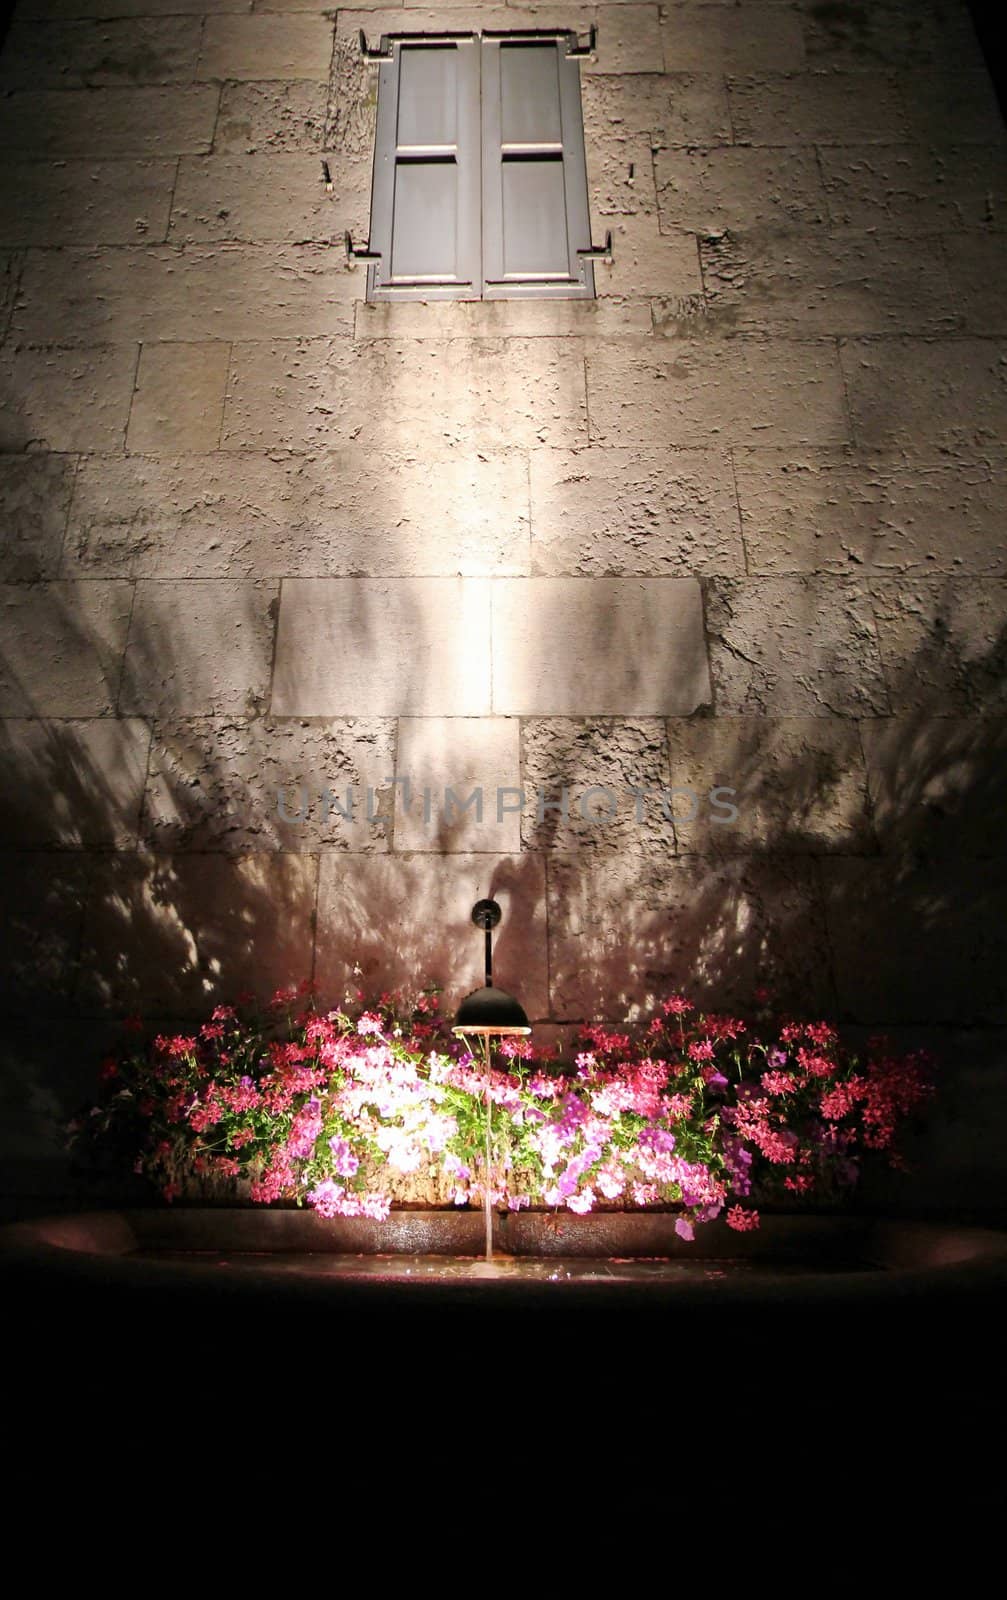 Fountain with red flowers in front of a wall with a window closed by shutters by night